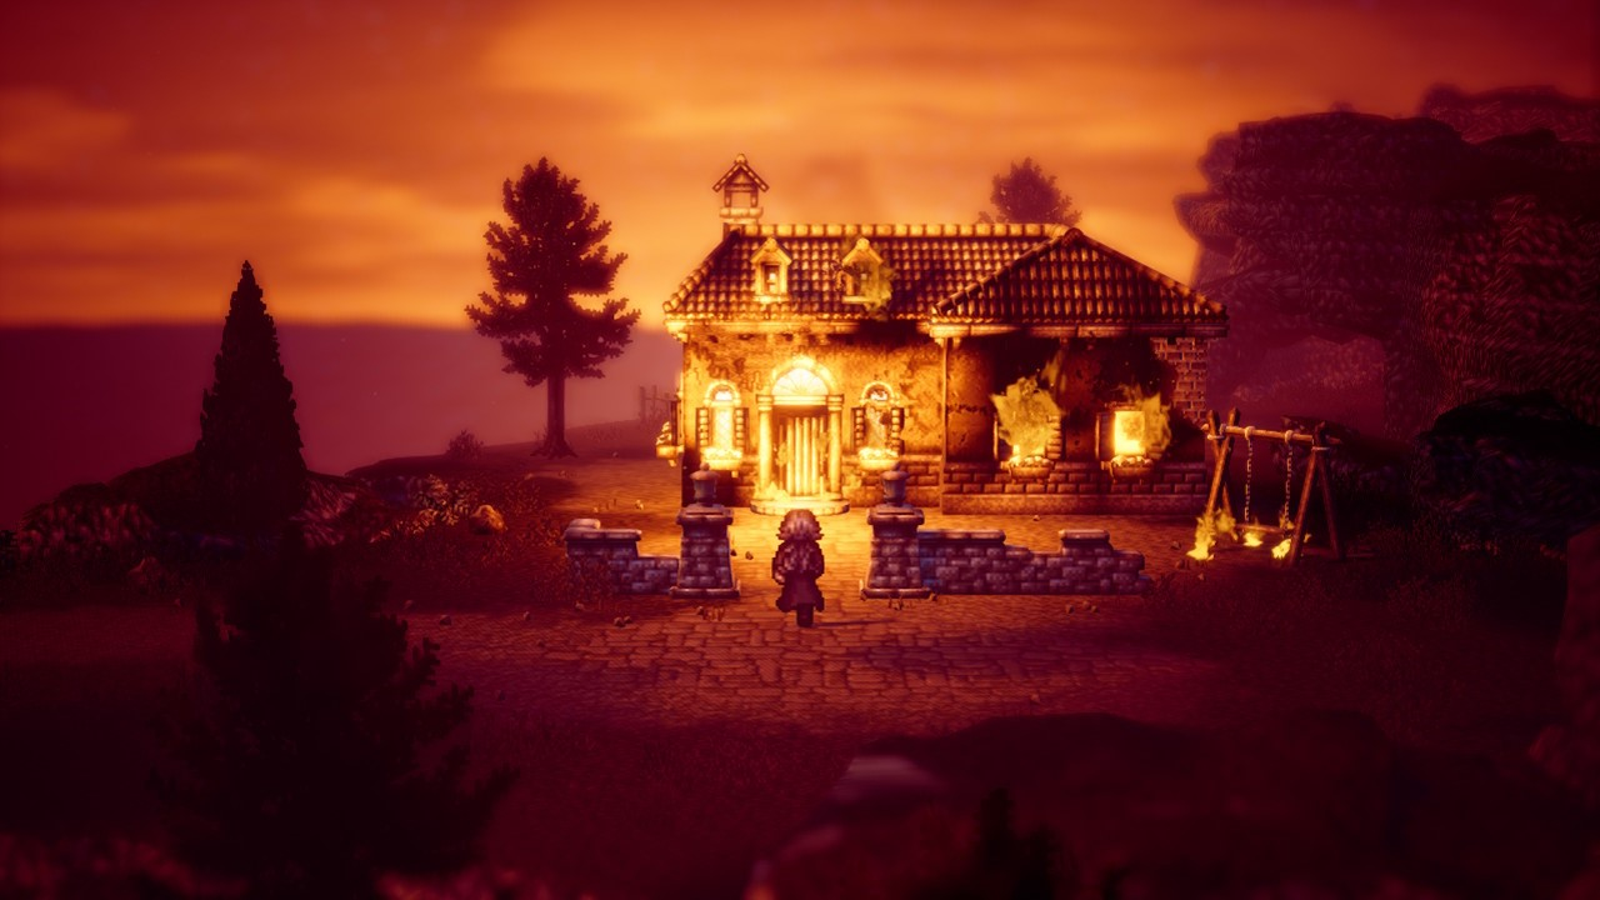 Octopath Traveler II Preview – A night and day difference?